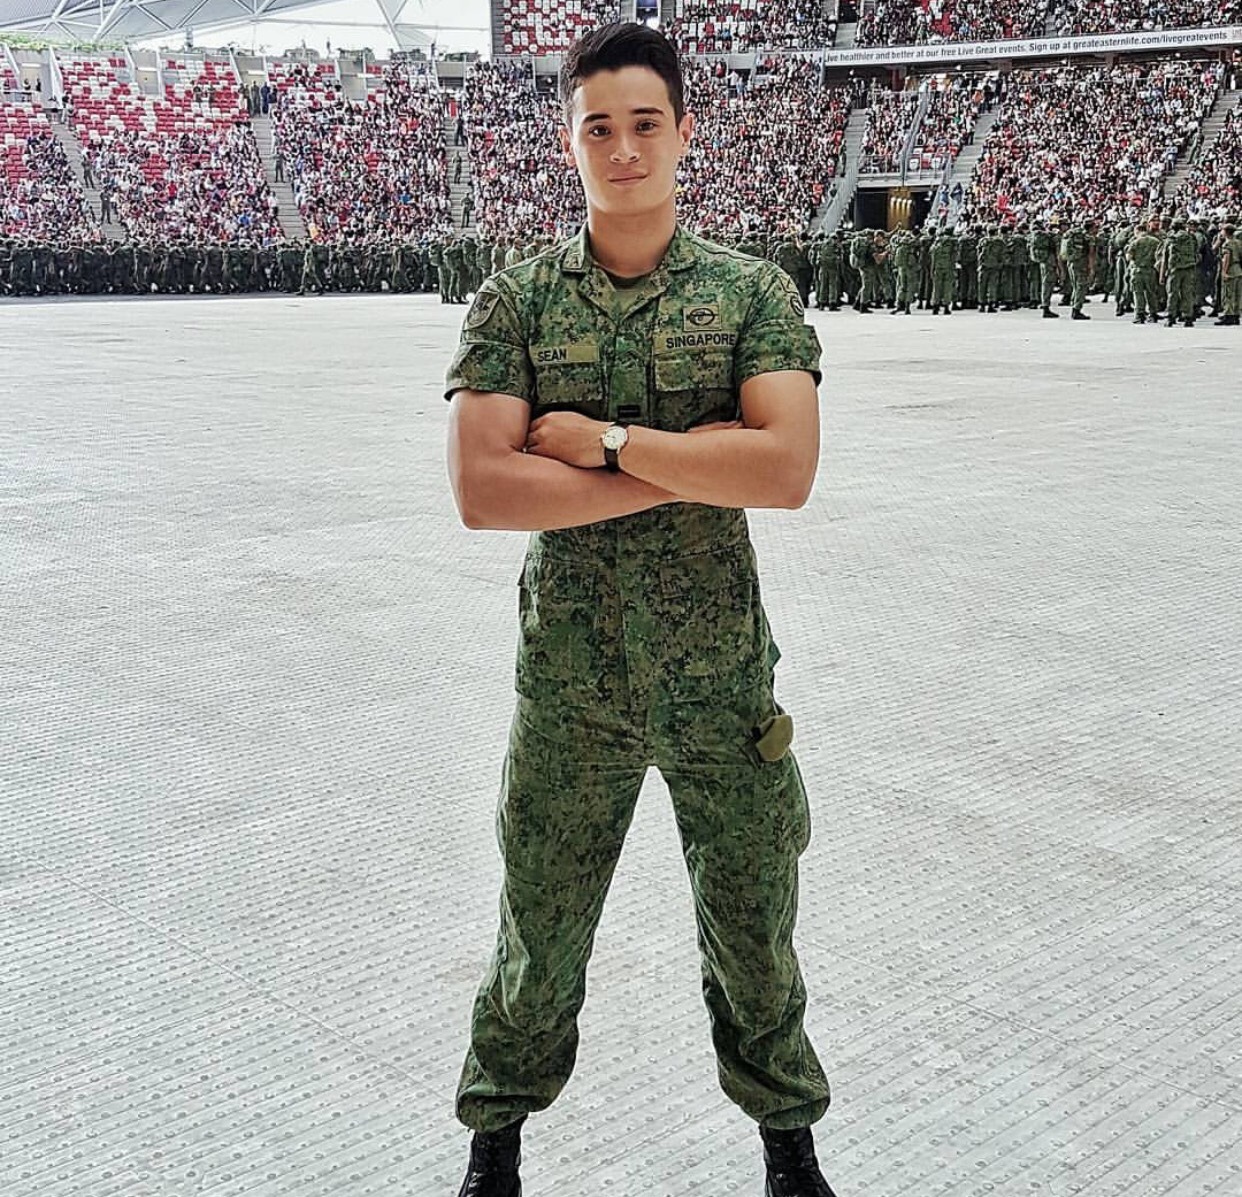 singaporeeboyy:  bugscasper:   |Men in uniforms - Soldiers| (2/3)  Here’s another